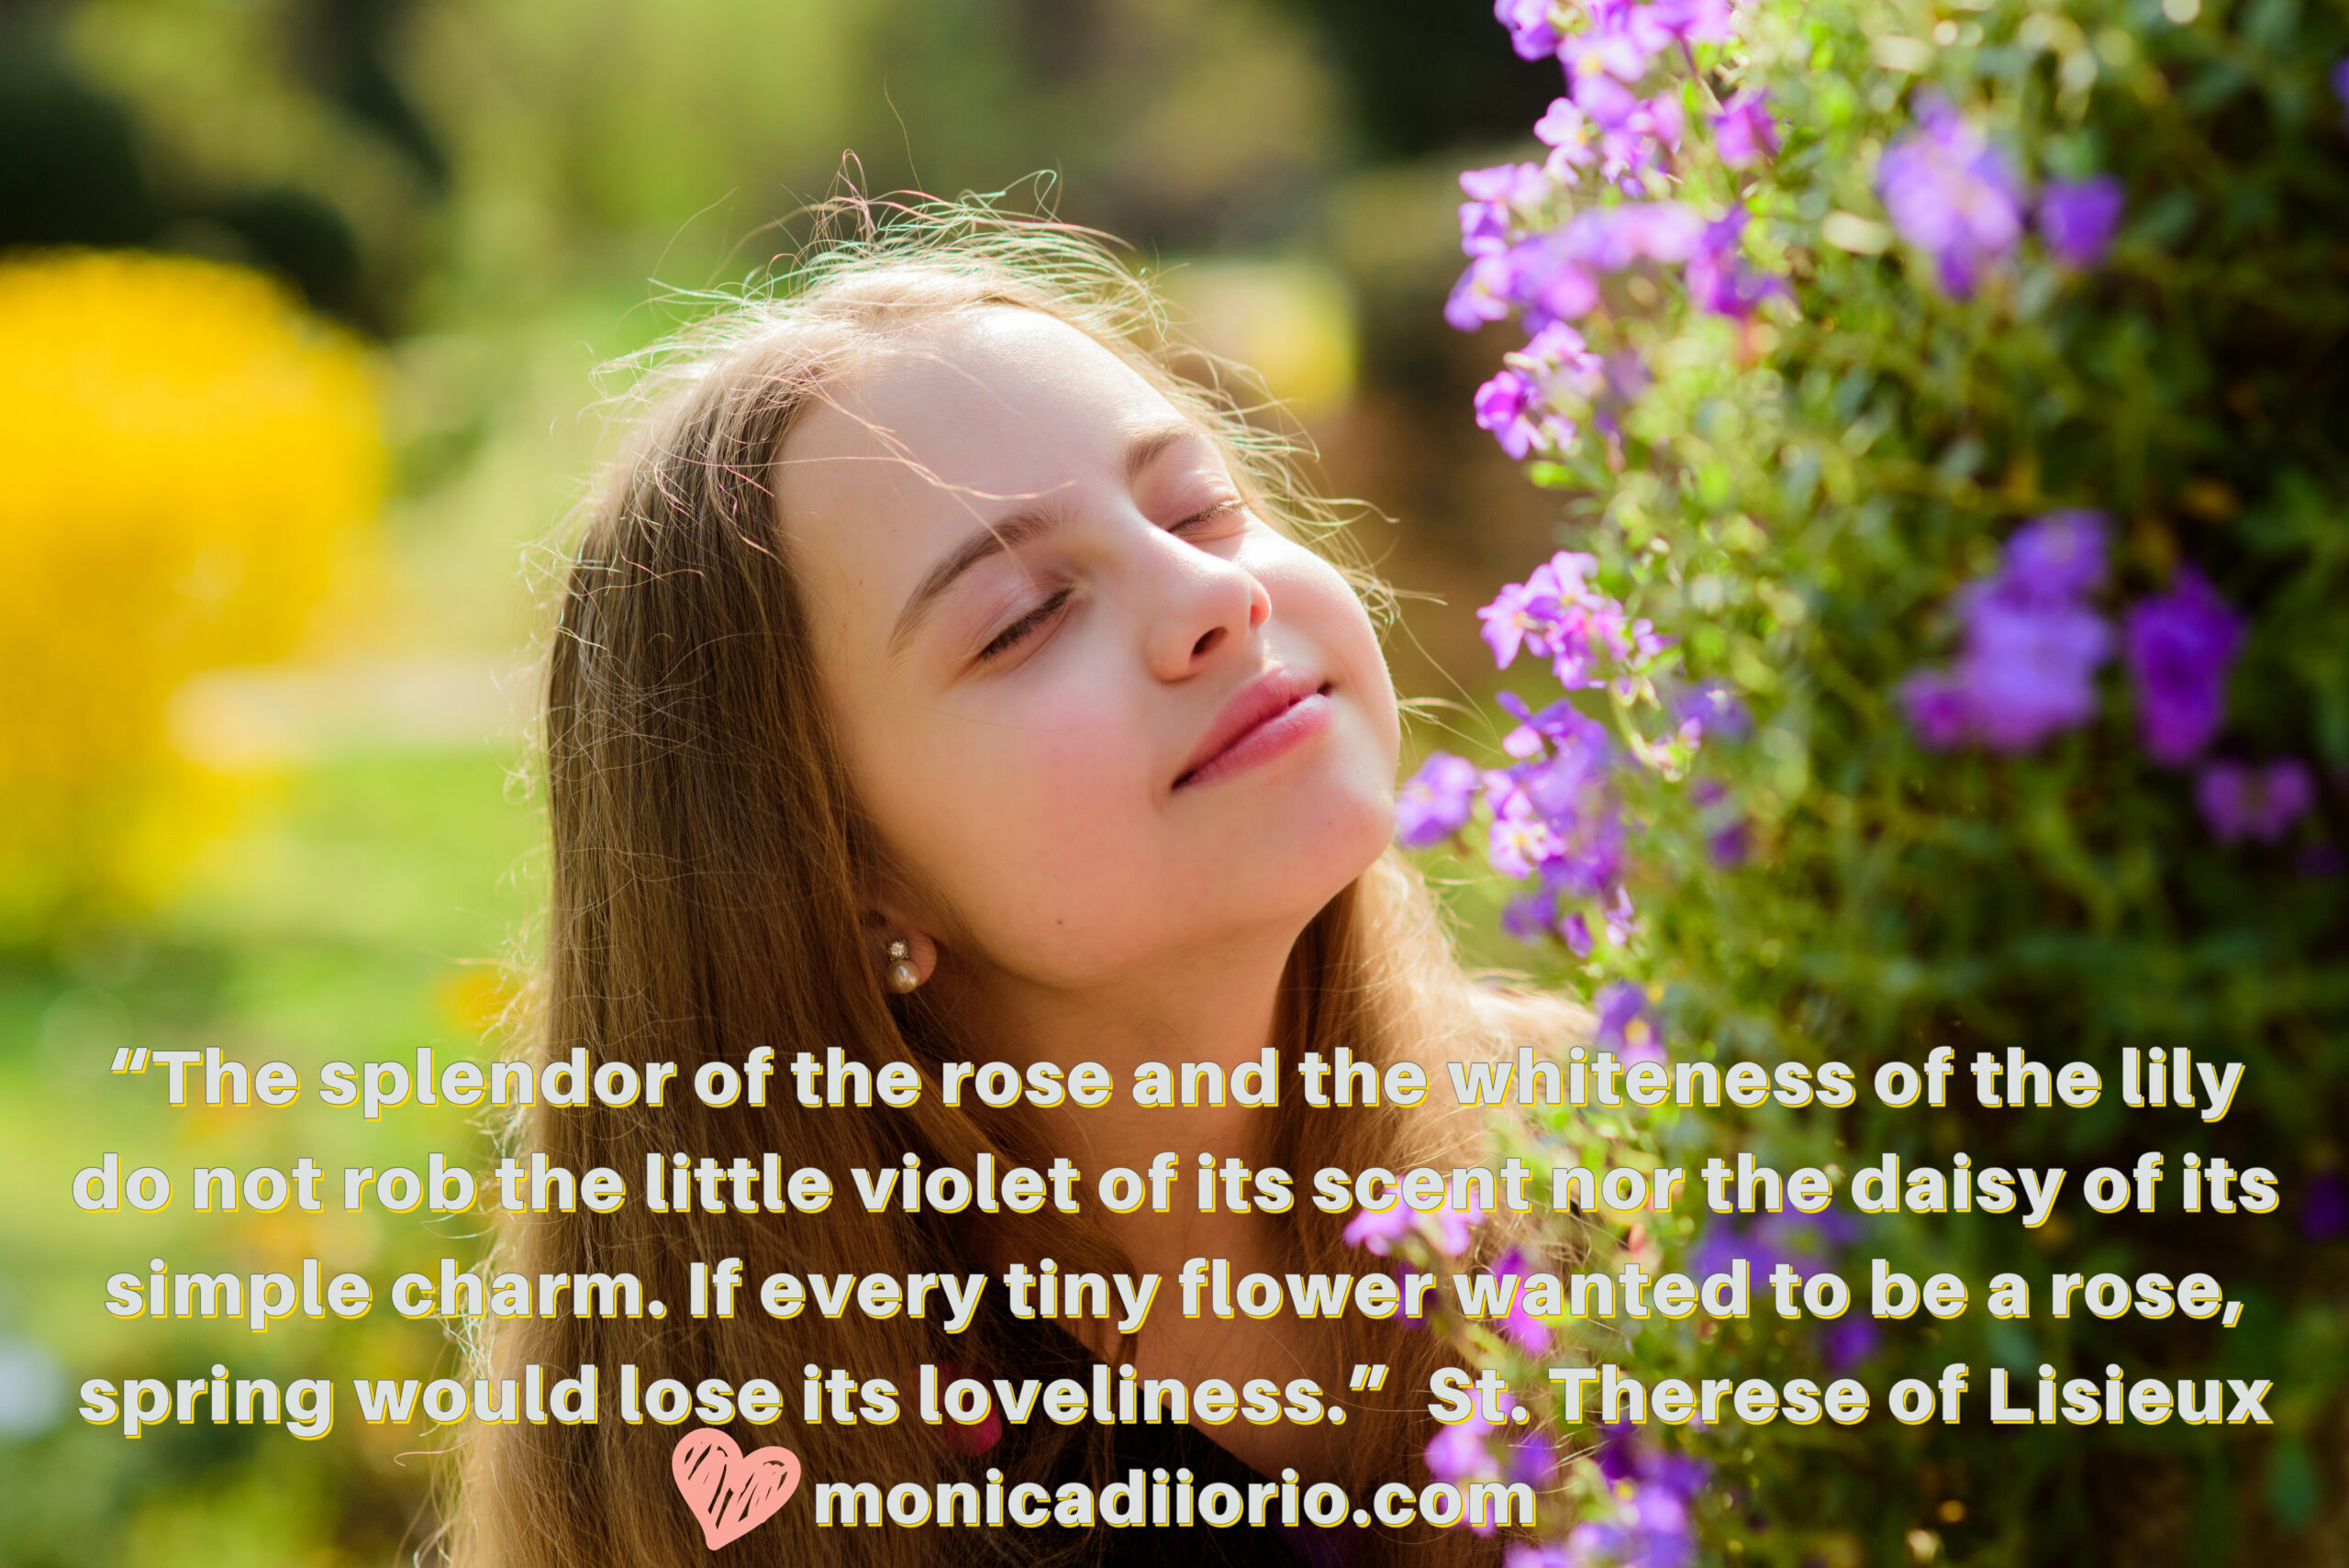 Quote from St. Therese of Lisieux